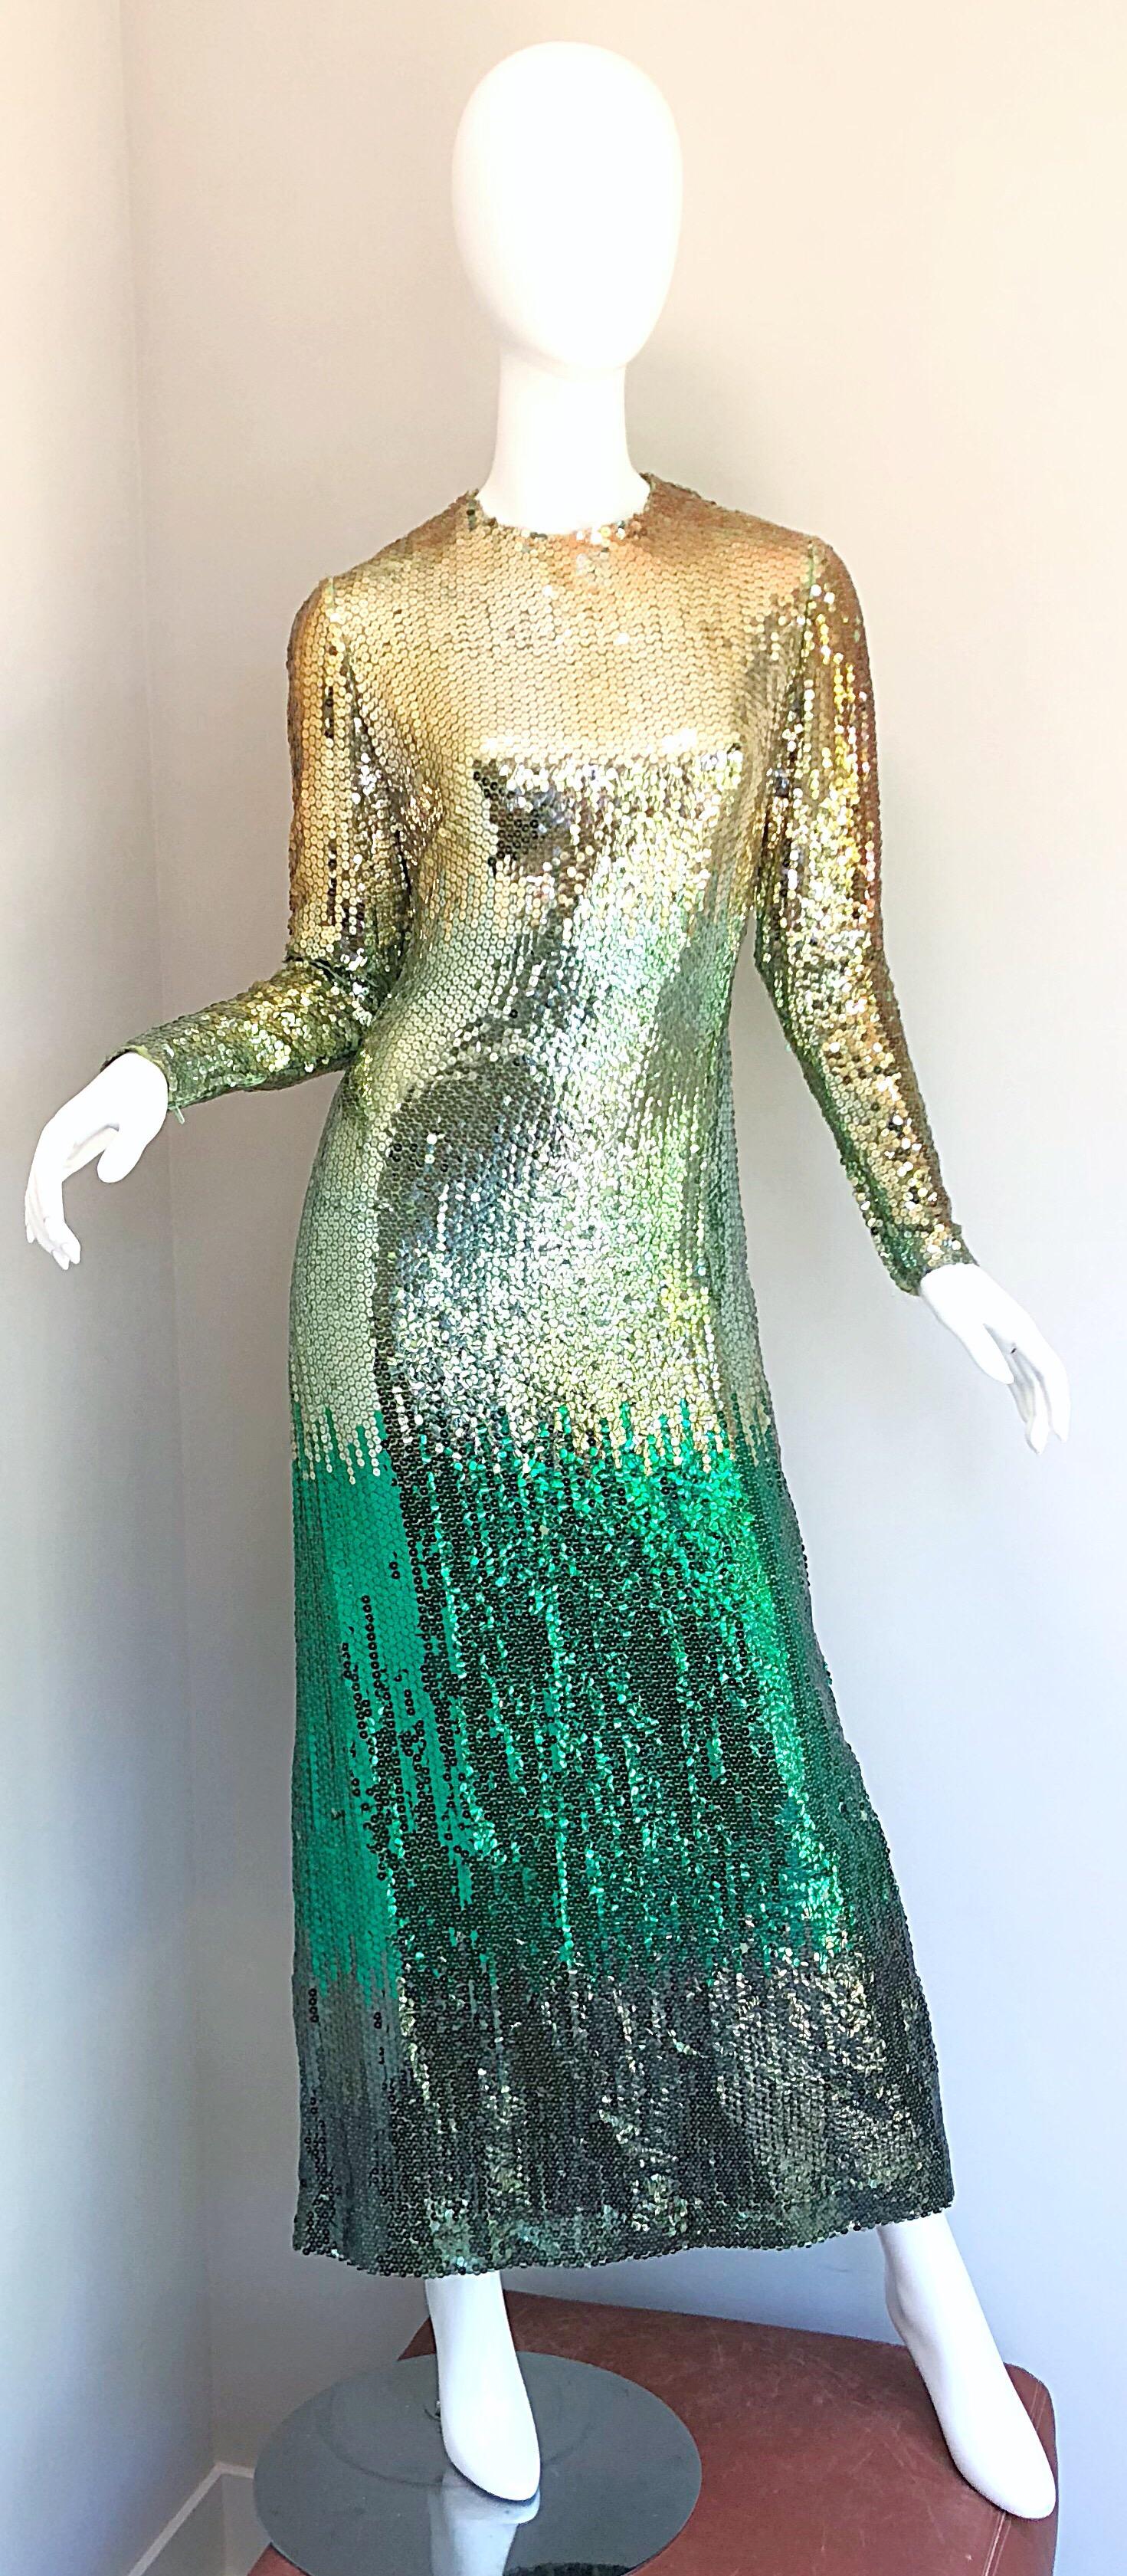 Beige Amazing 1960s Bill Blass Gold + Green Ombre Sequined Vintage 60s Gown Dress